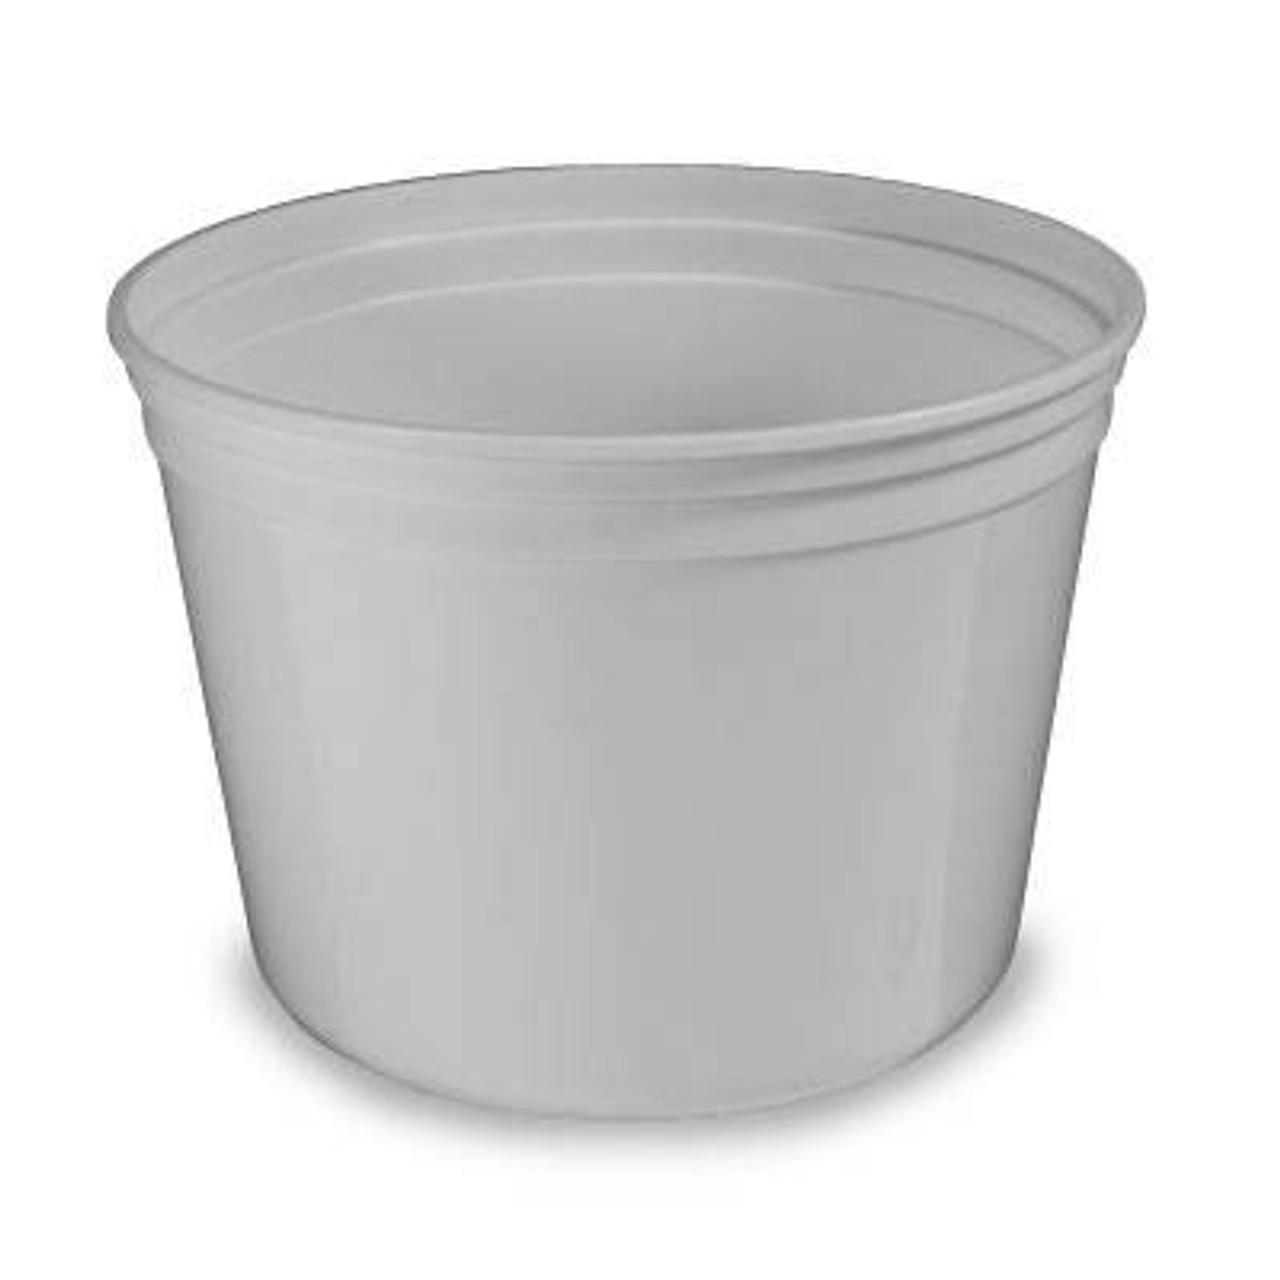 2/3 Gallon (85 oz.) BPA Free Food Grade Round Bucket with Lid (T60785CPB) -  starting quantity 10 count - FREE SHIPPING - ePackageSupply